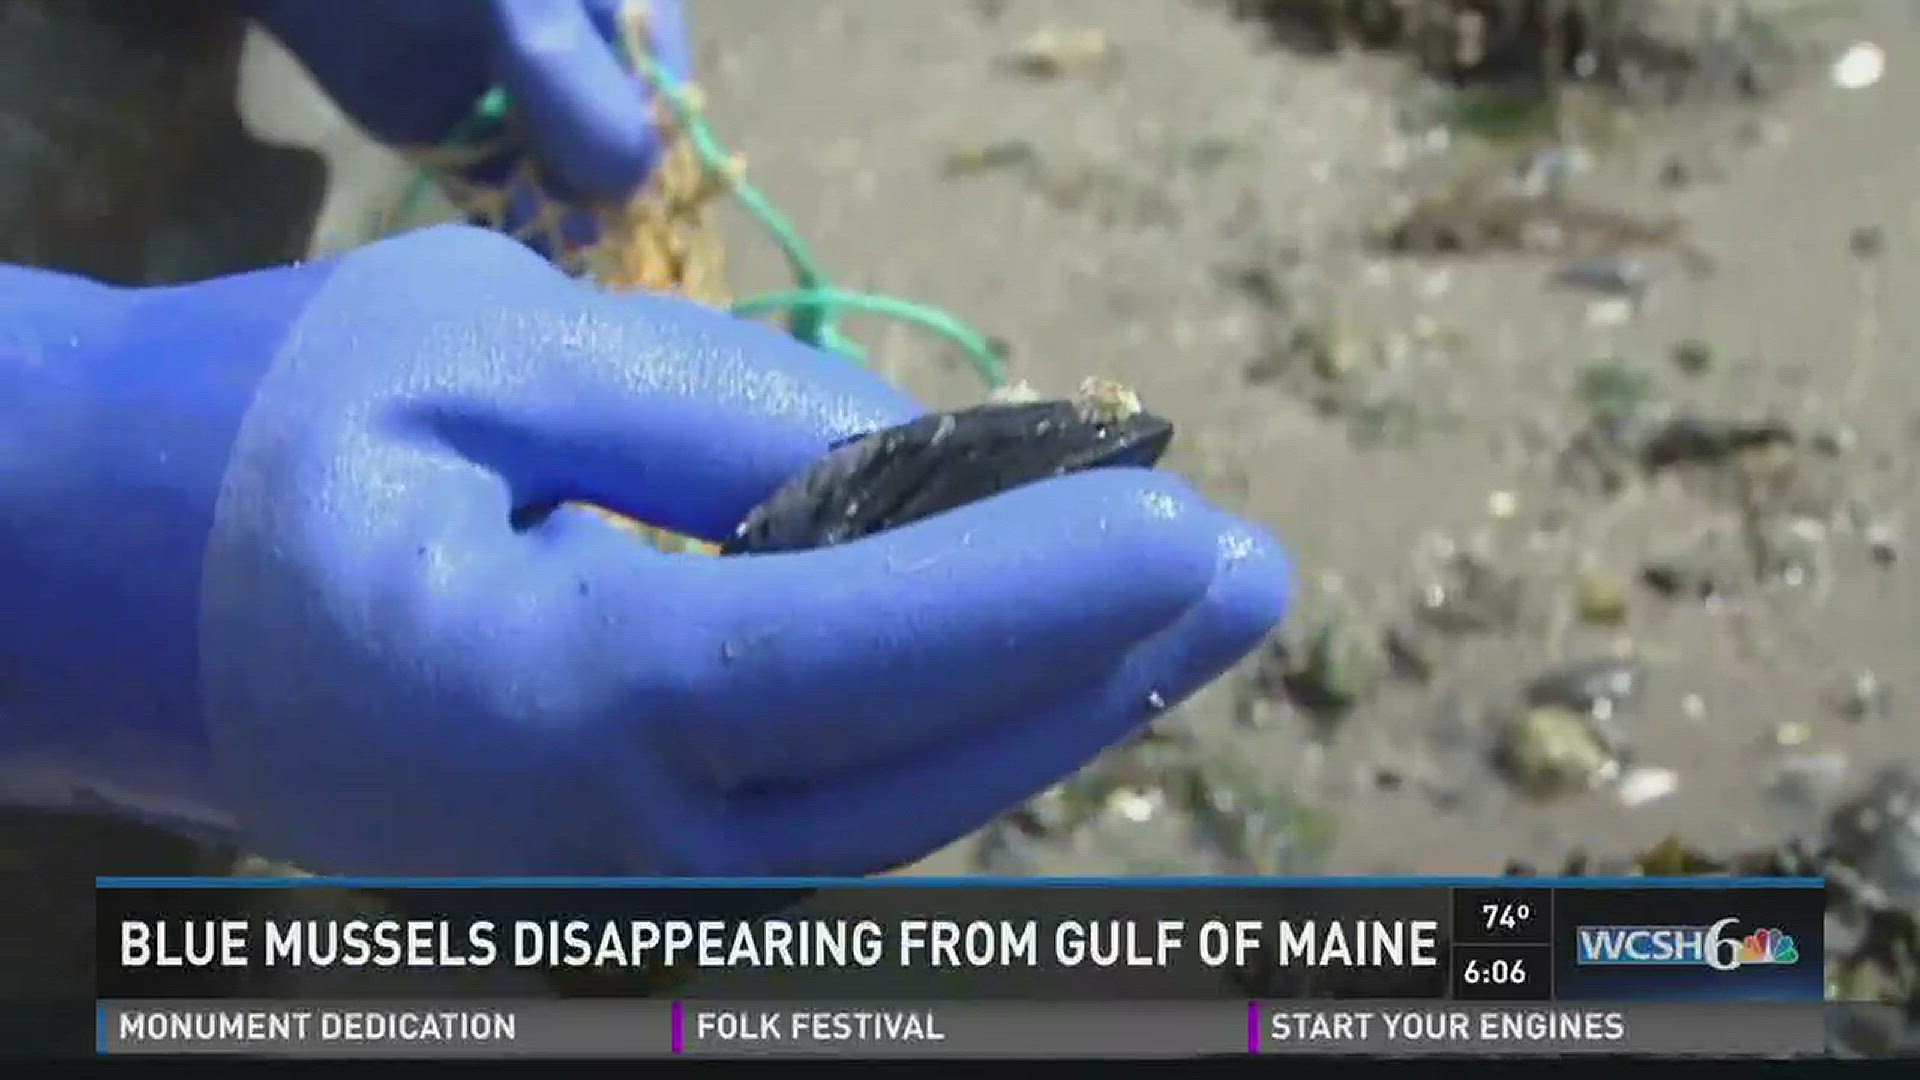 Blue mussels disappearing from Gulf of Maine